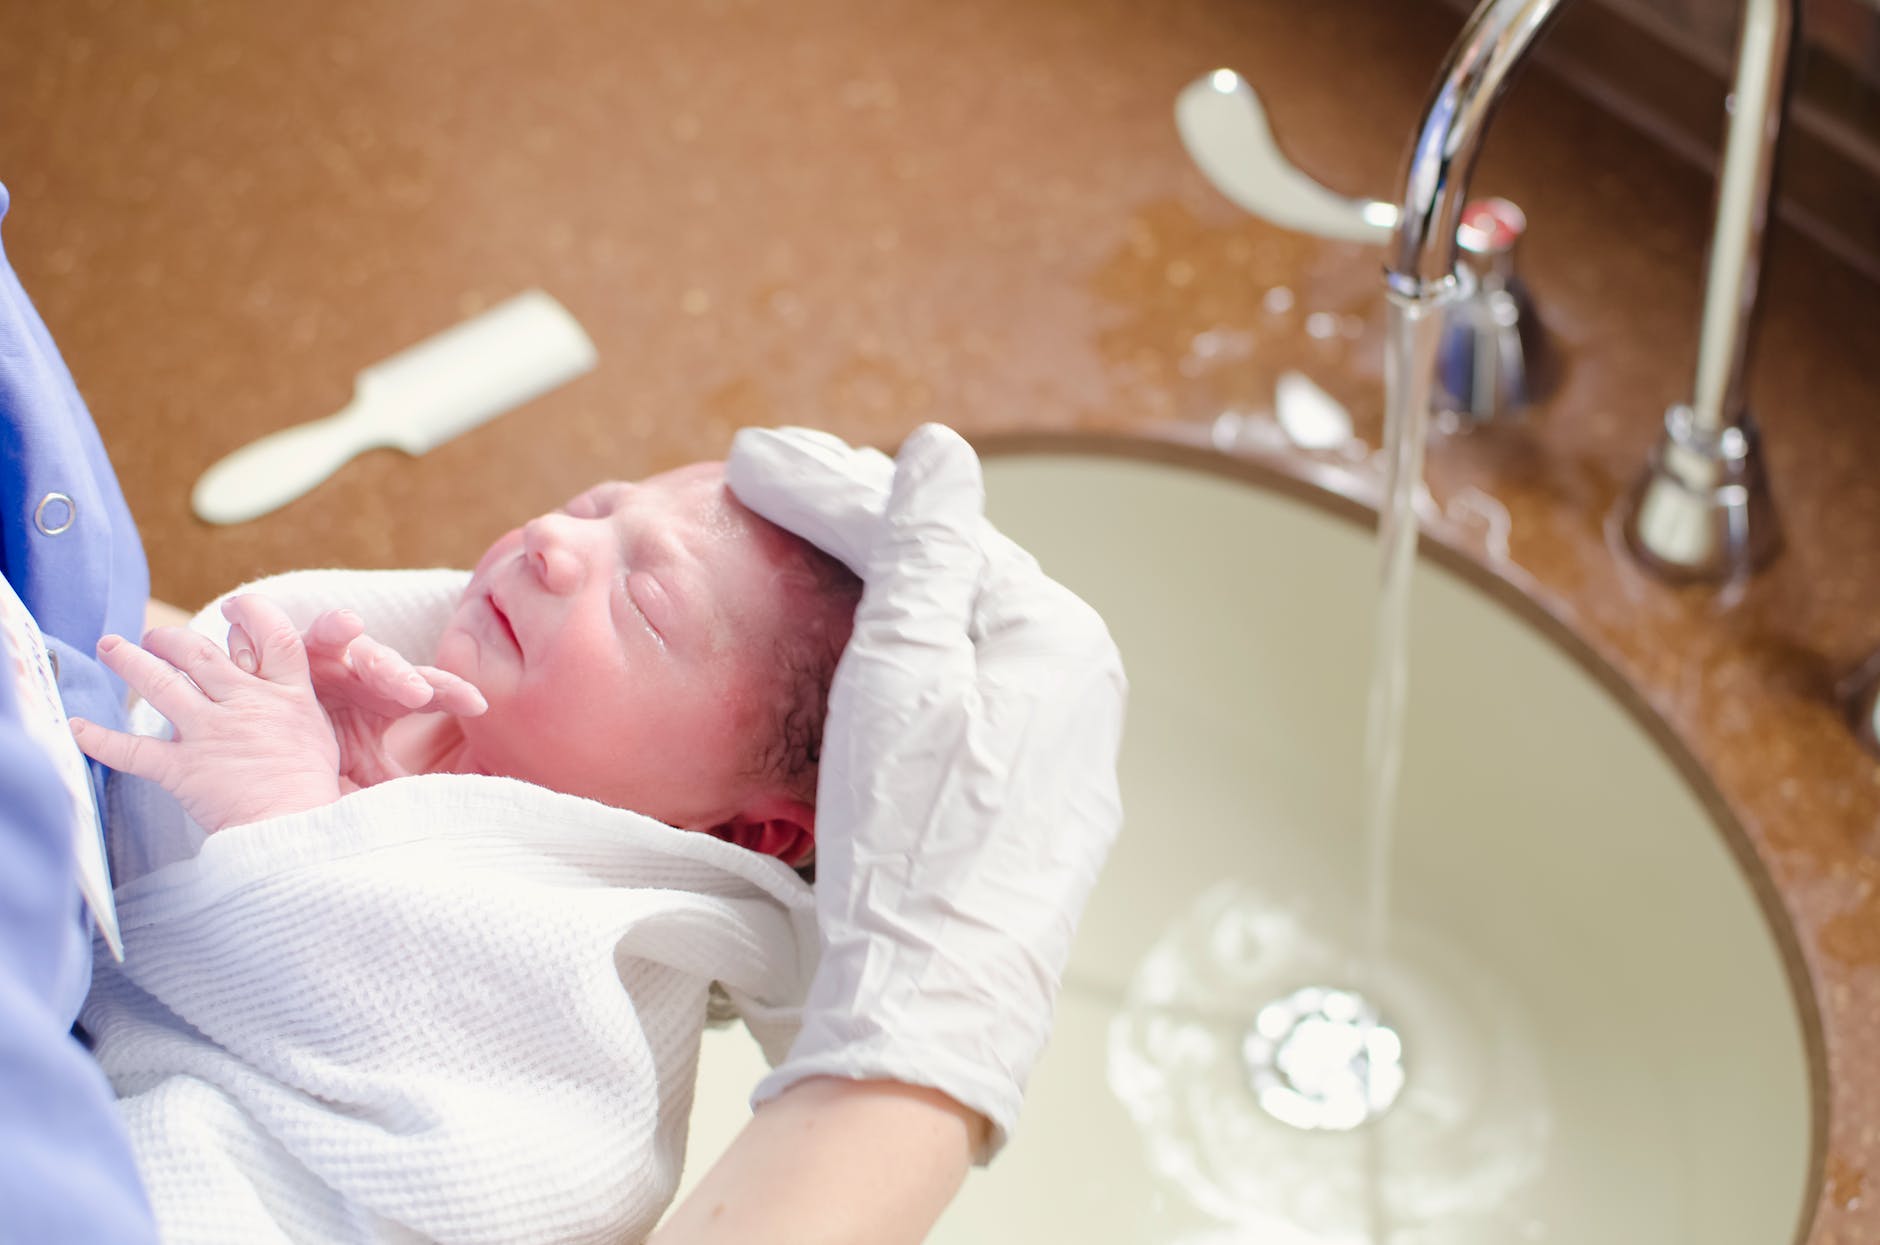 a person bathing the baby